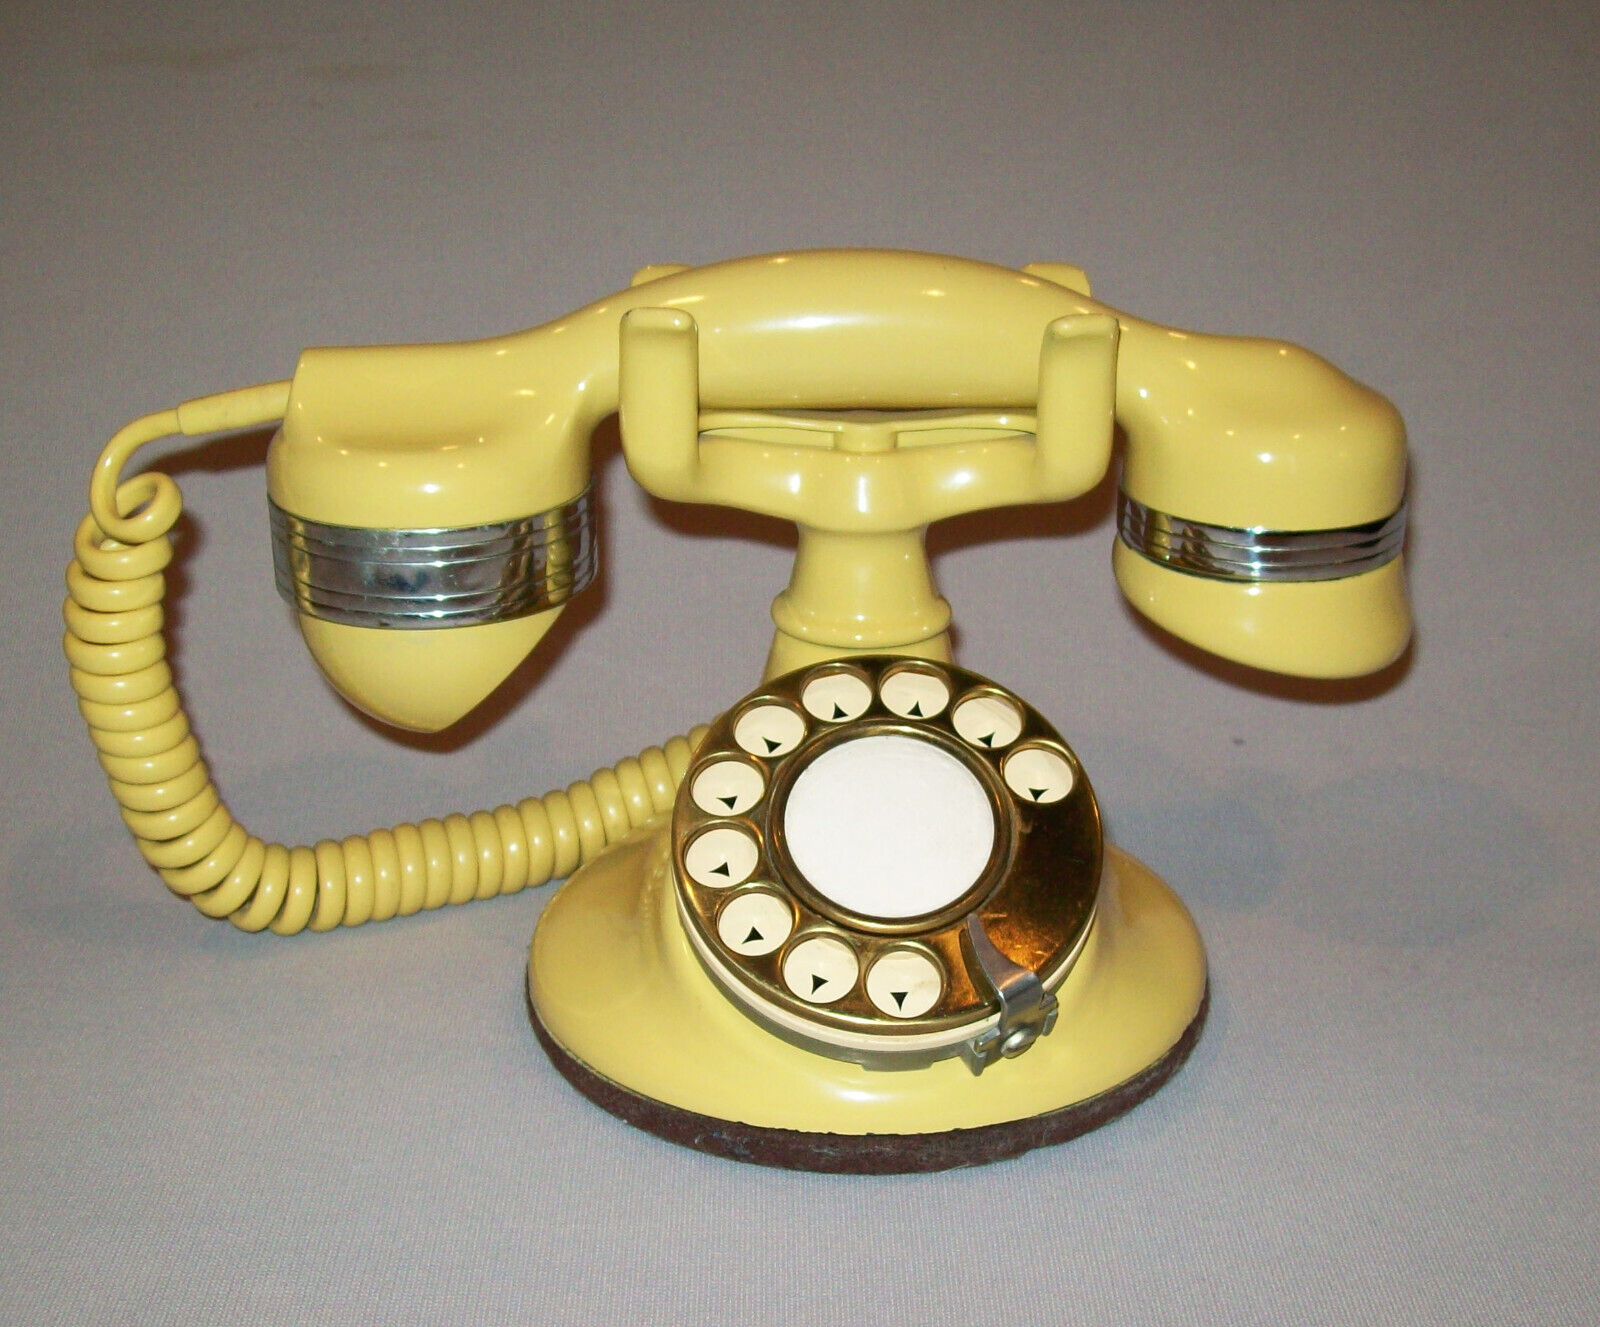 Antique Vtg Ca 1920s Rotary Dial Desk Set Telephone Beautiful Yellow Automatic